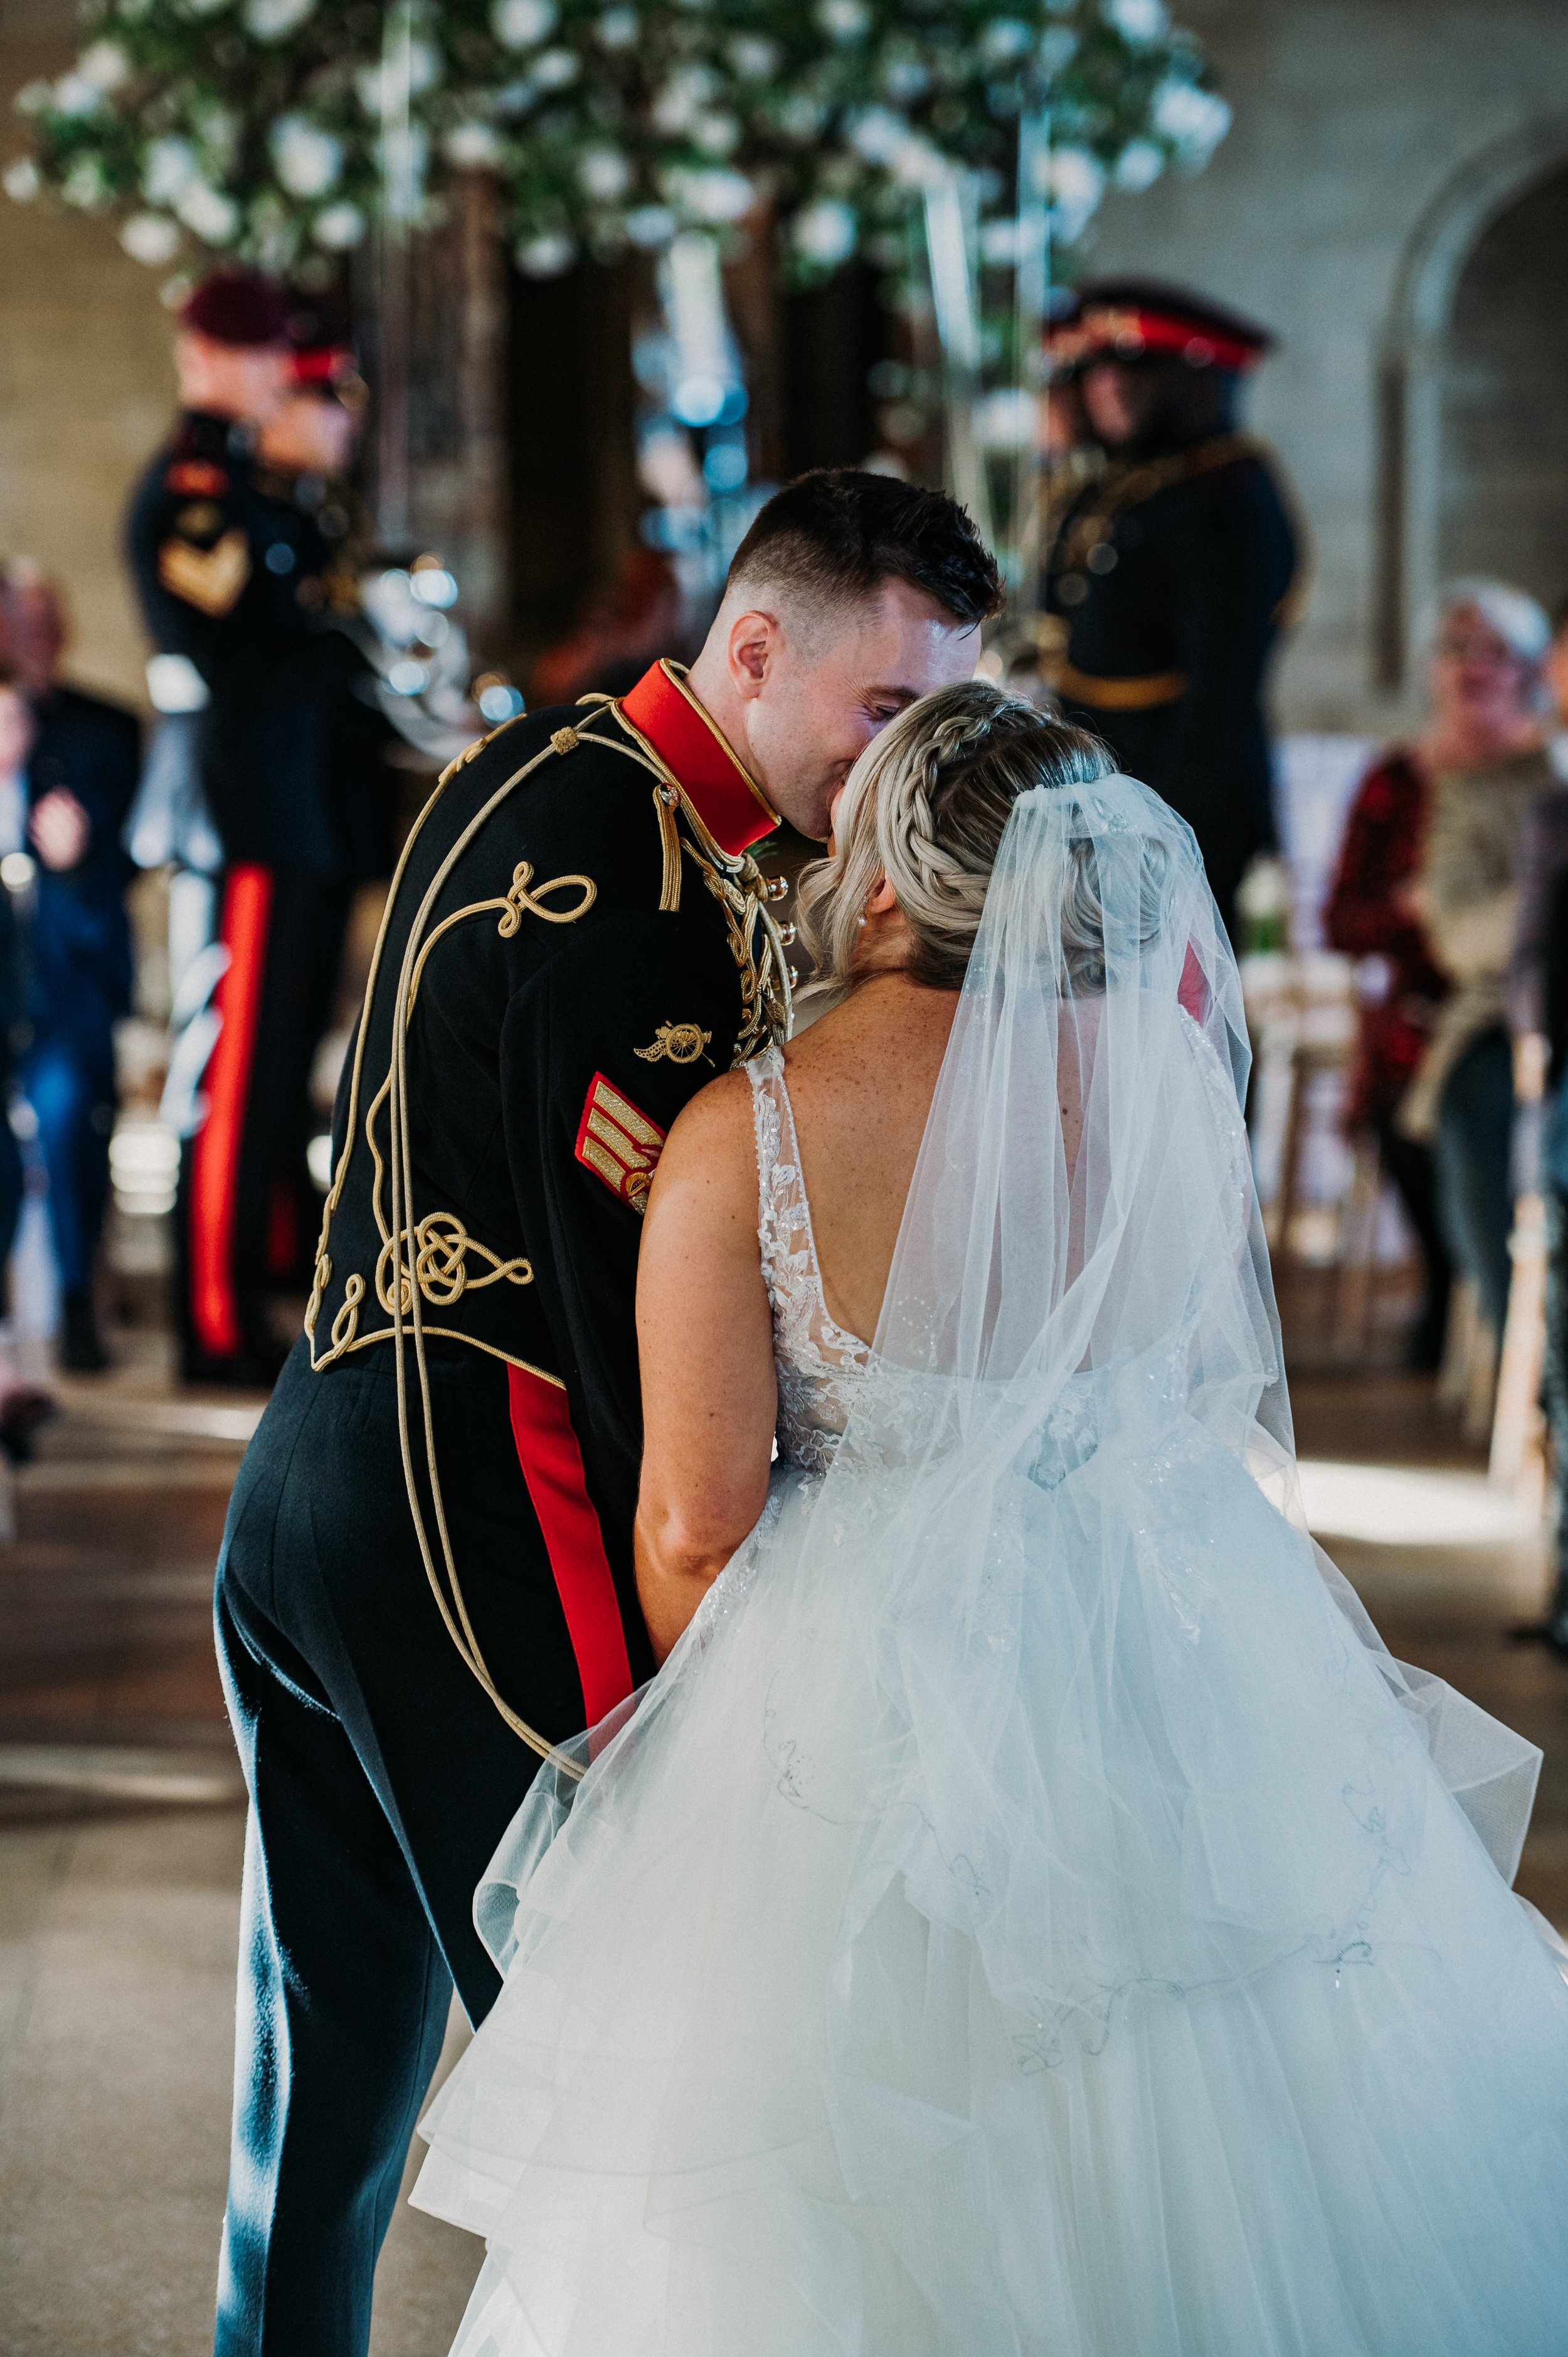 The bride and groom share their first kiss before they walk out of the ceremony room as brand new husband and wife at Sneaton Castle, Whitby.